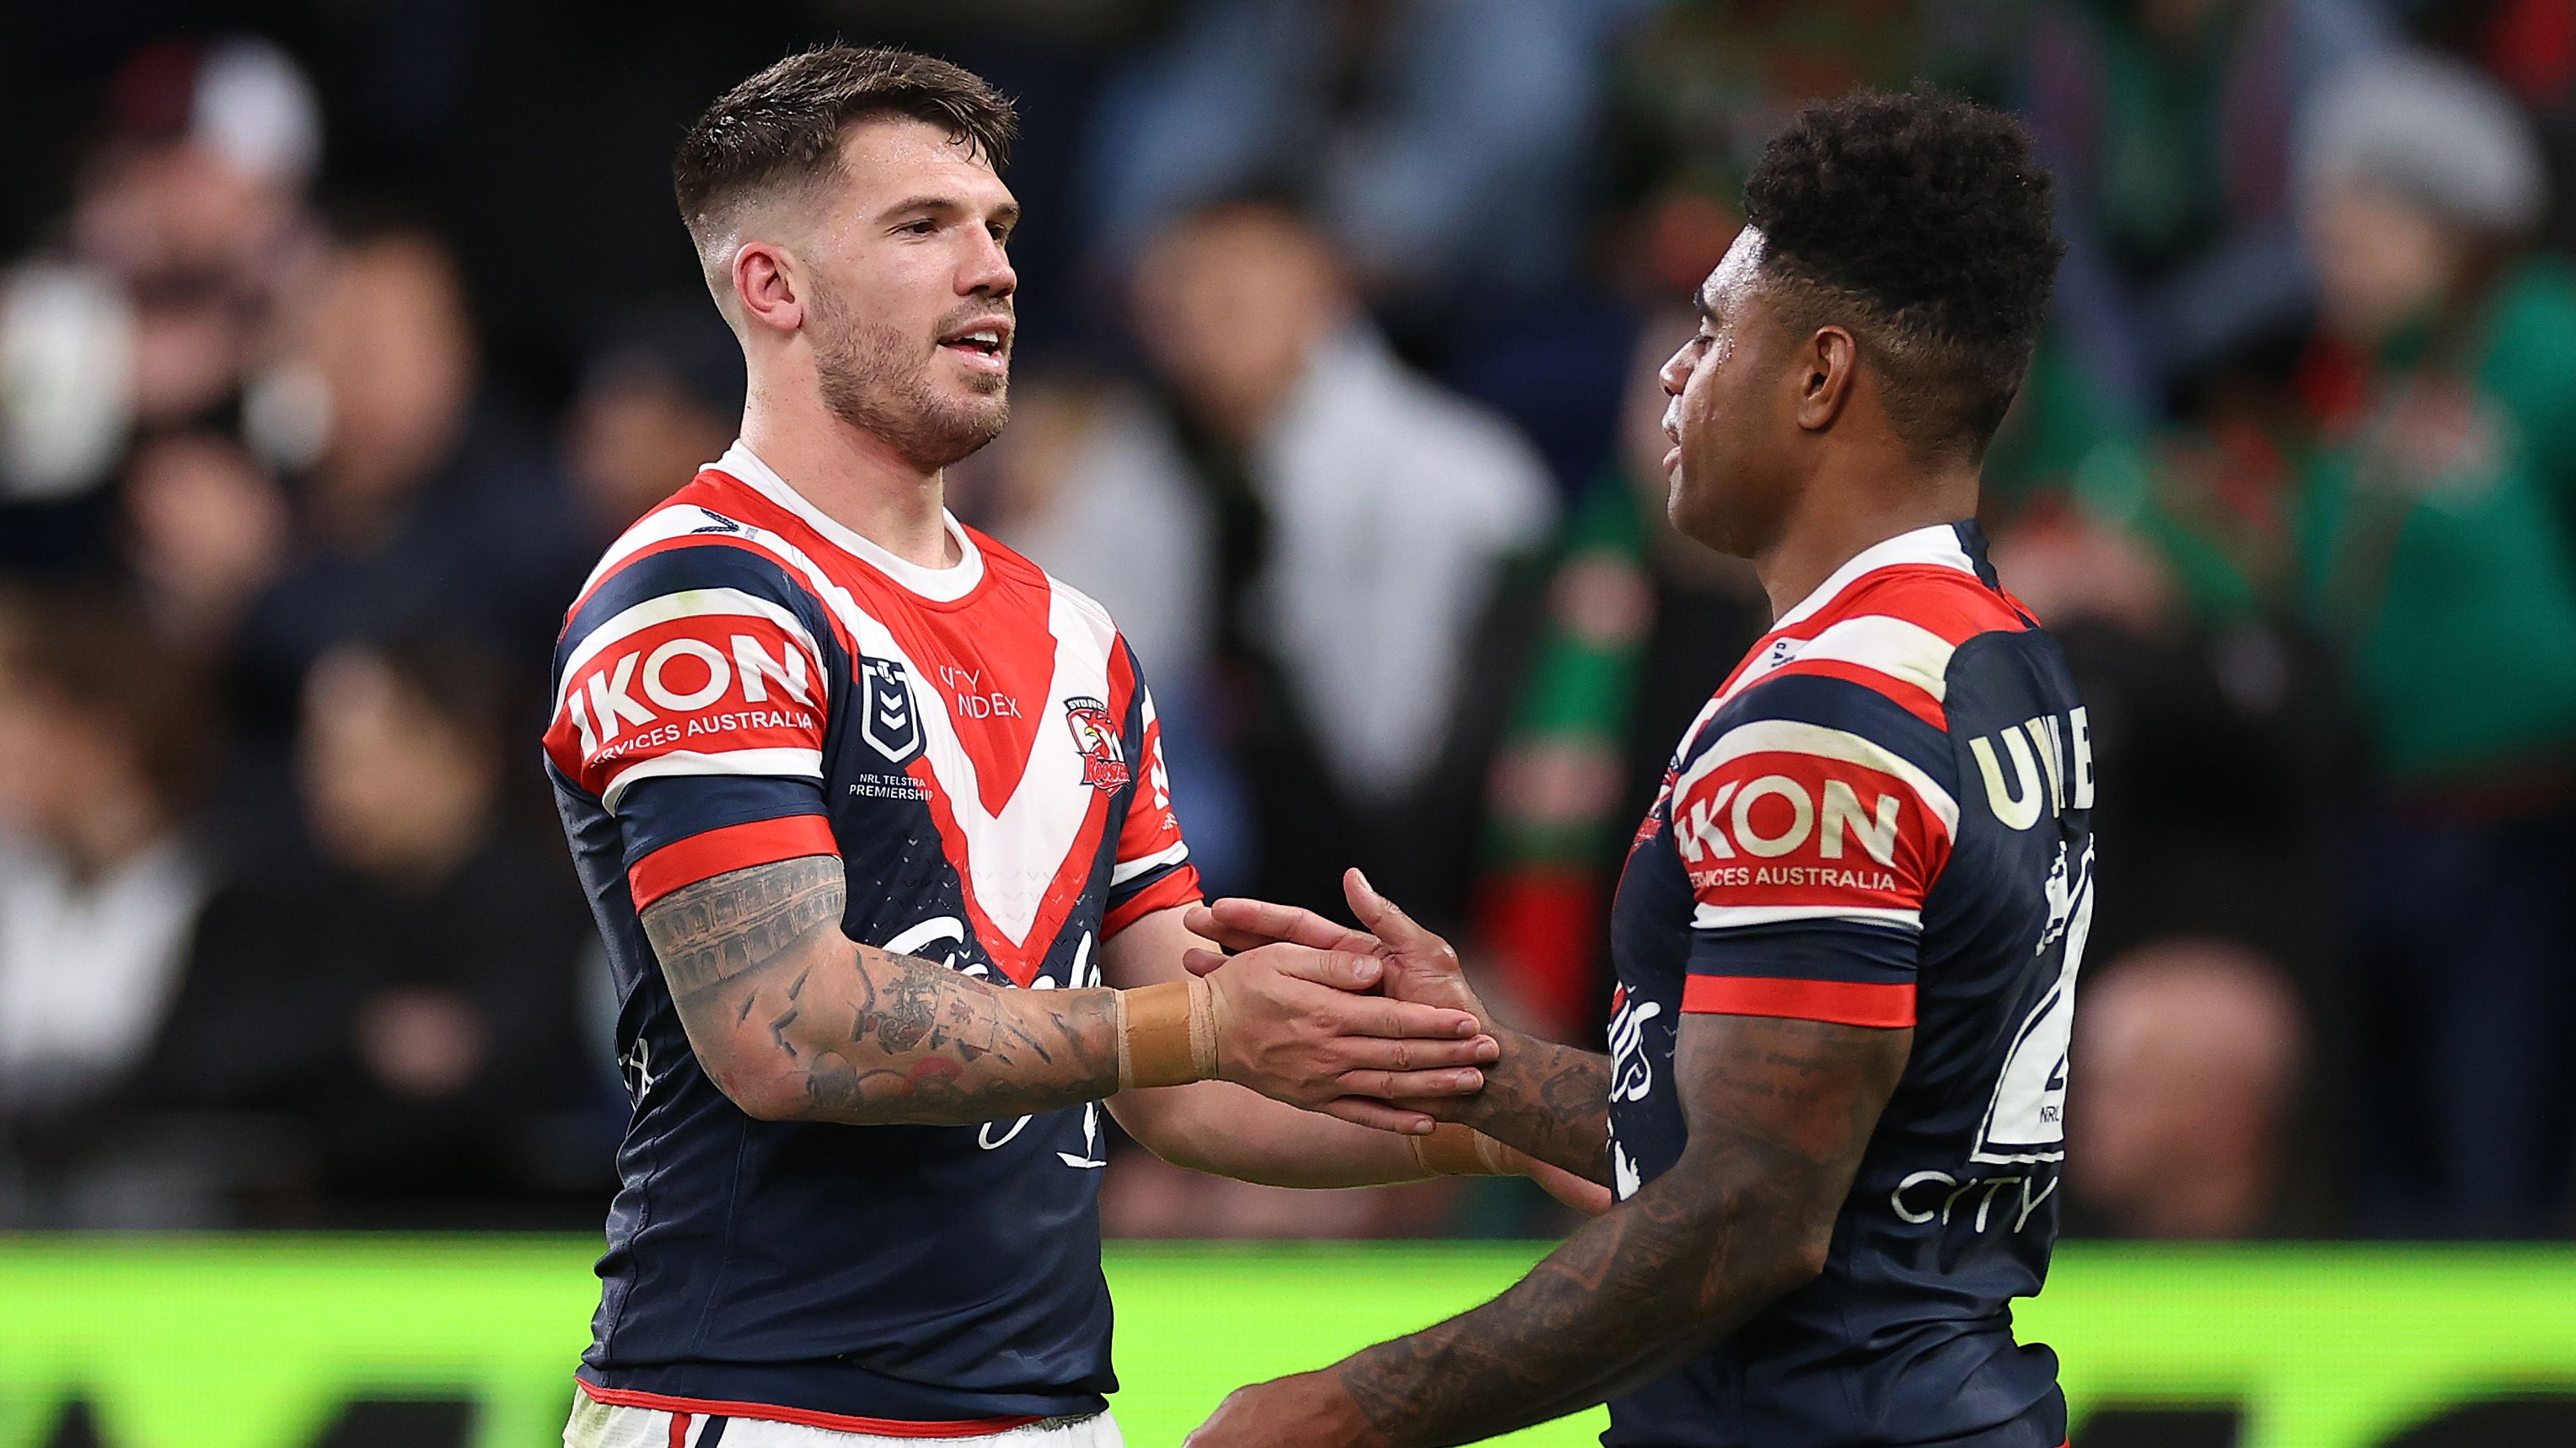 Oliver Gildart of the Roosters and Kevin Naiqama of the Roosters celebrate after winning the round 25 NRL match between the Sydney Roosters and the South Sydney Rabbitohs at Allianz Stadium on September 02, 2022, in Sydney, Australia. (Photo by Cameron Spencer/Getty Images)